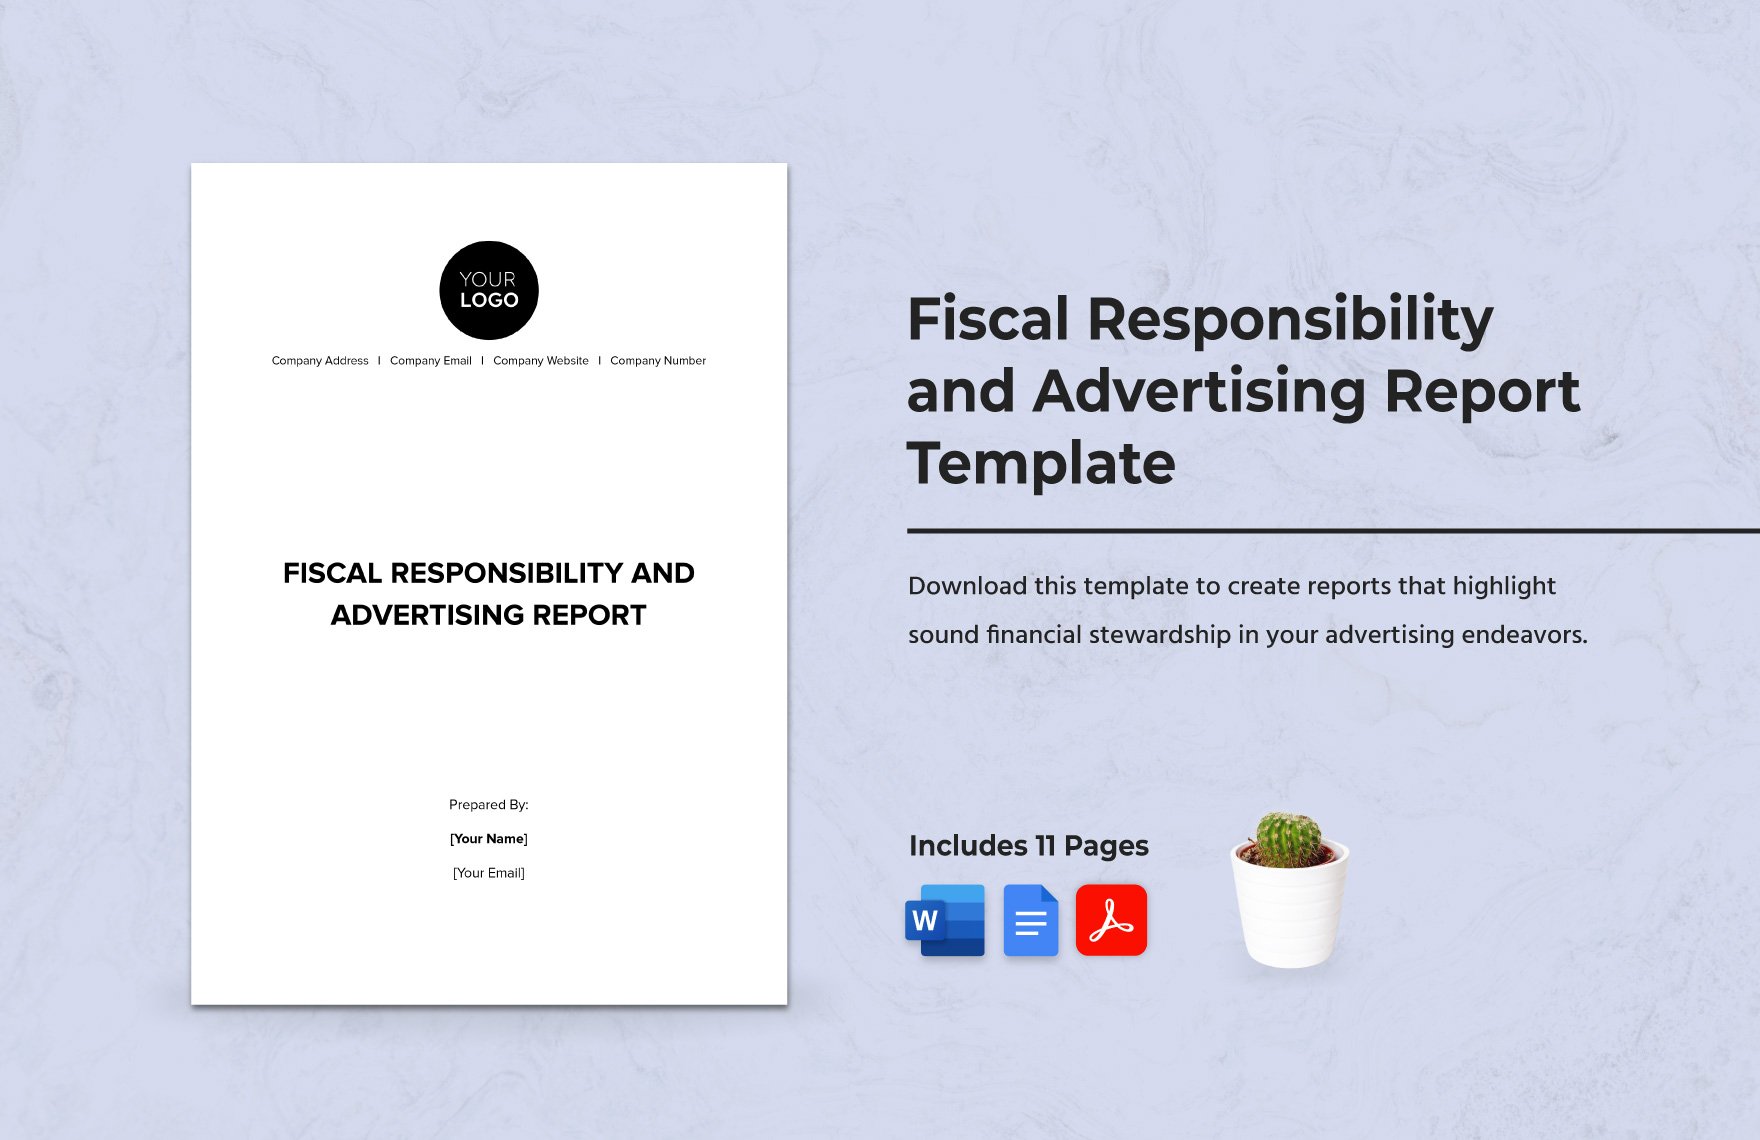 Fiscal Responsibility and Advertising Report Template in Word, Google Docs, PDF